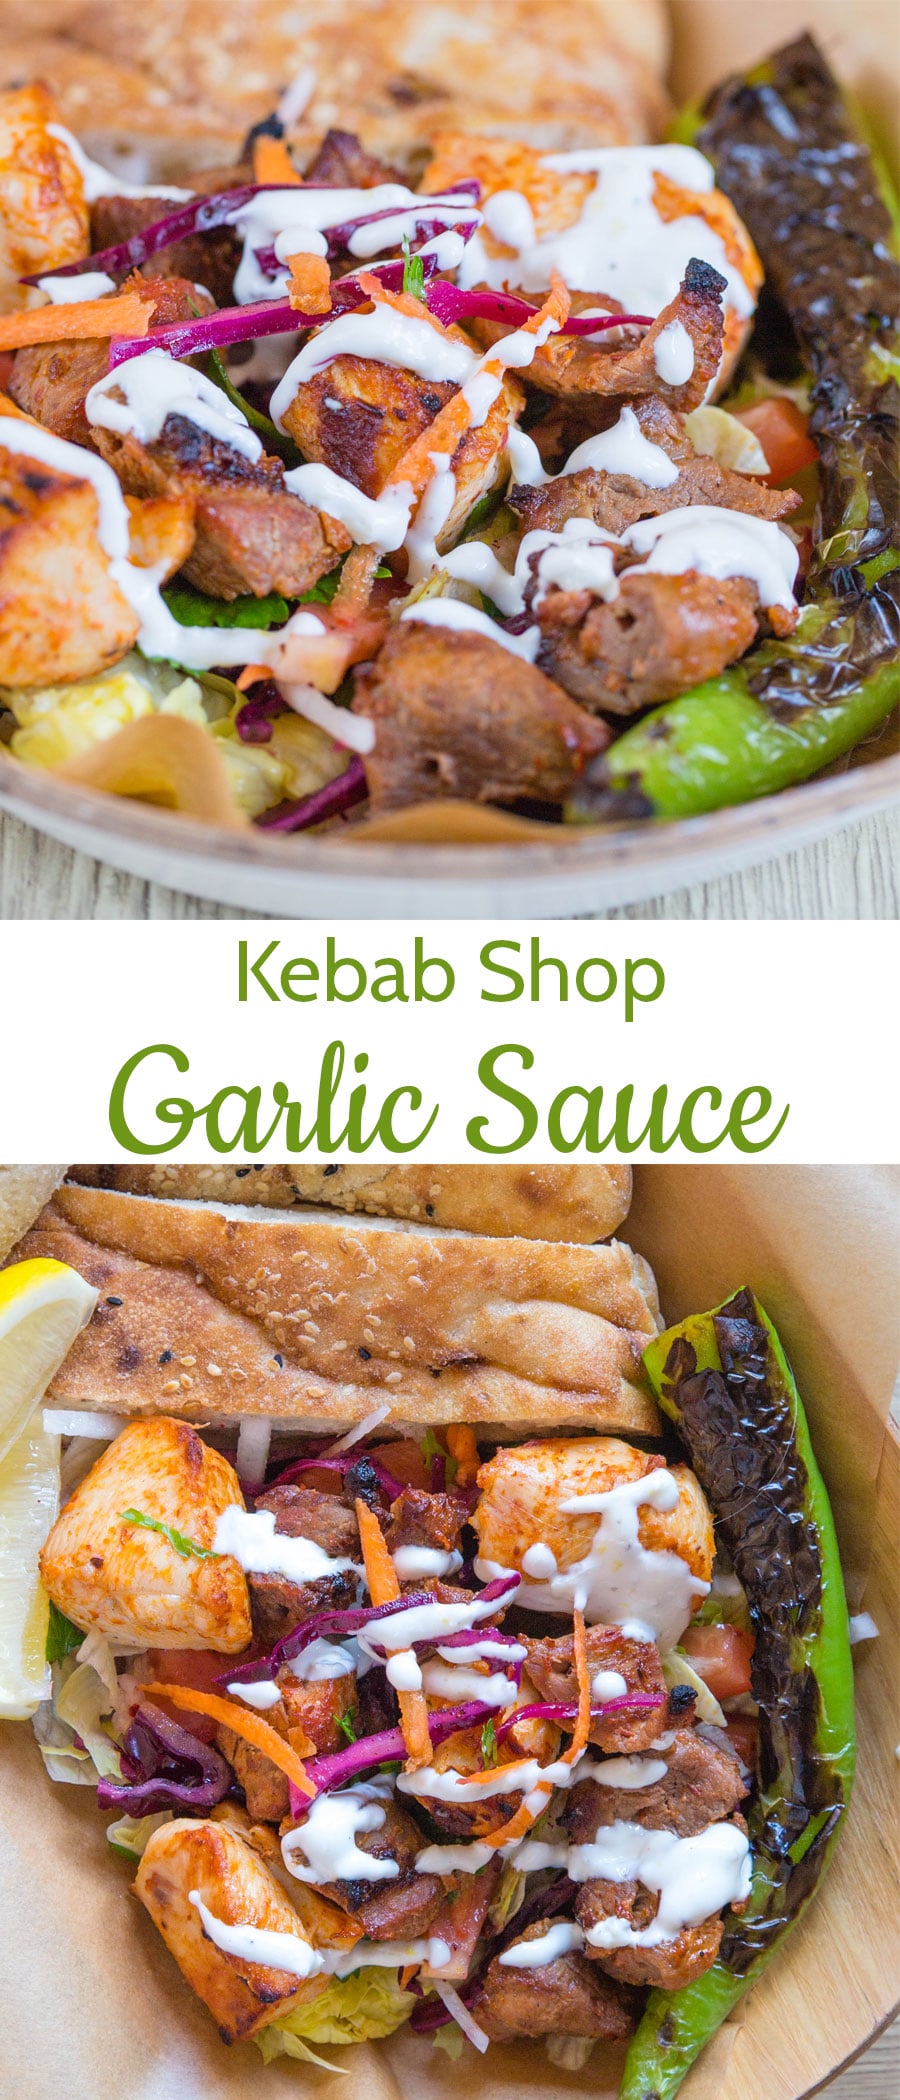 Kebab shop garlic sauce - the authentic take away experience at home. This easy recipe isn't just for kebabs: it's perfect on grilled meat or vegetables, or drizzled over crispy chips.